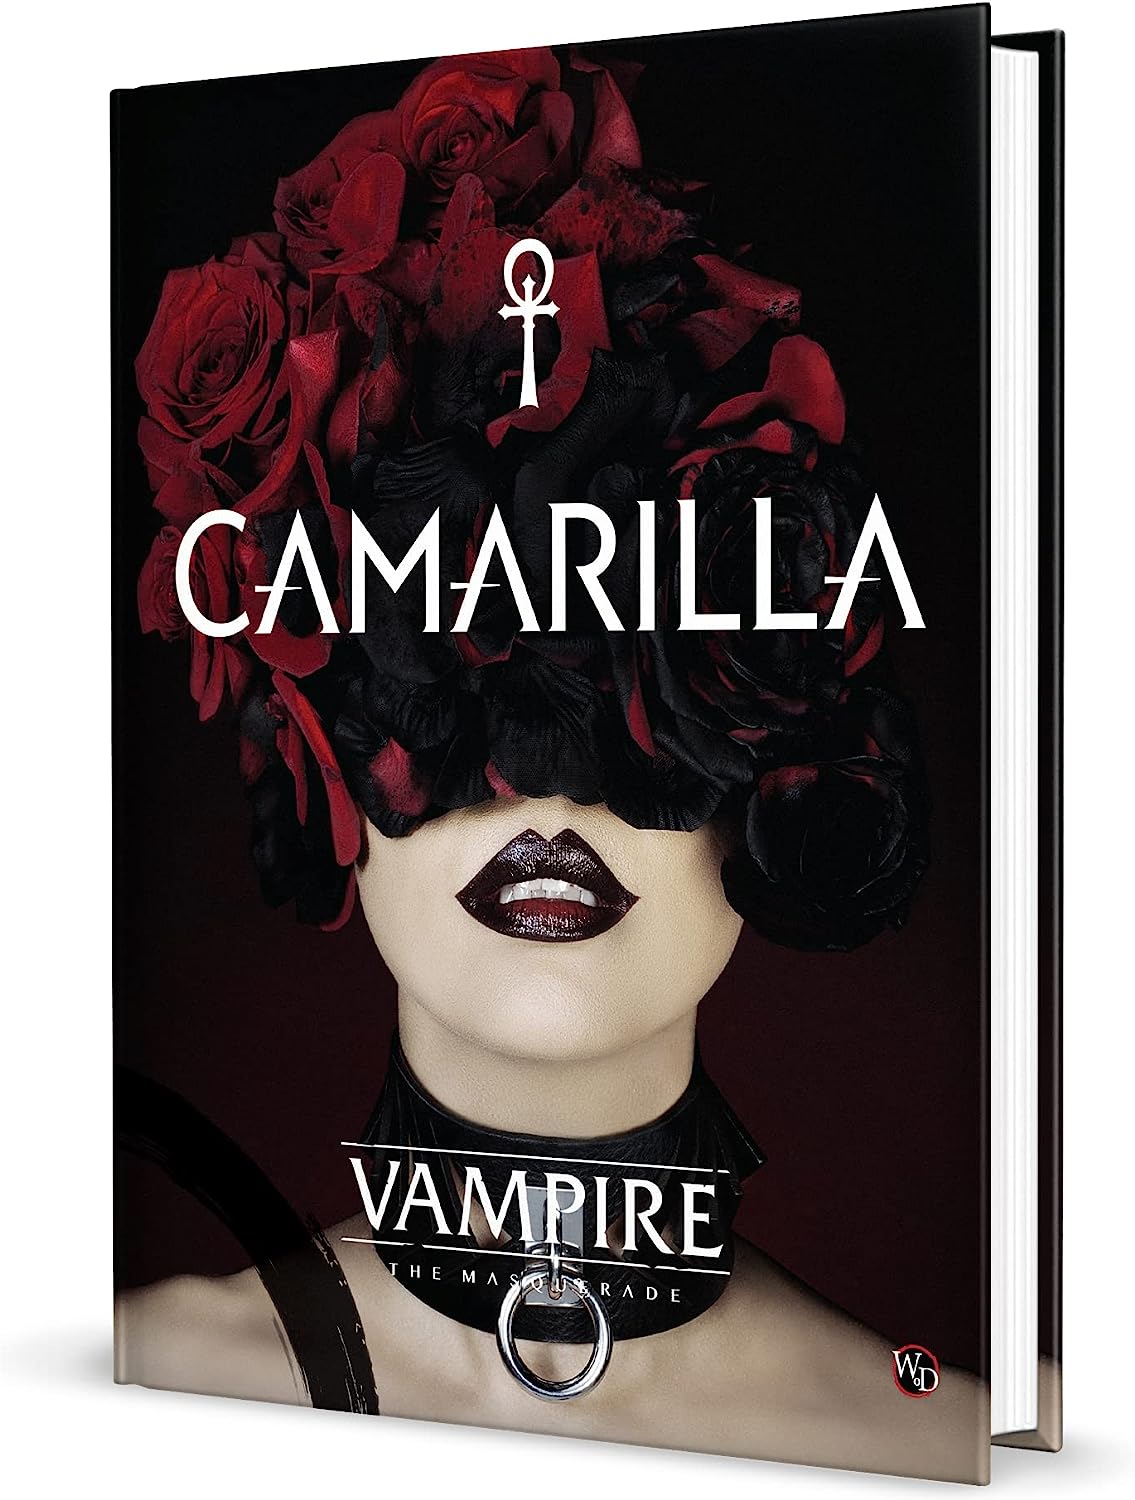 Vampire: The Masquerade 5th Edition Roleplaying Game Camarilla Sourcebook | CCGPrime